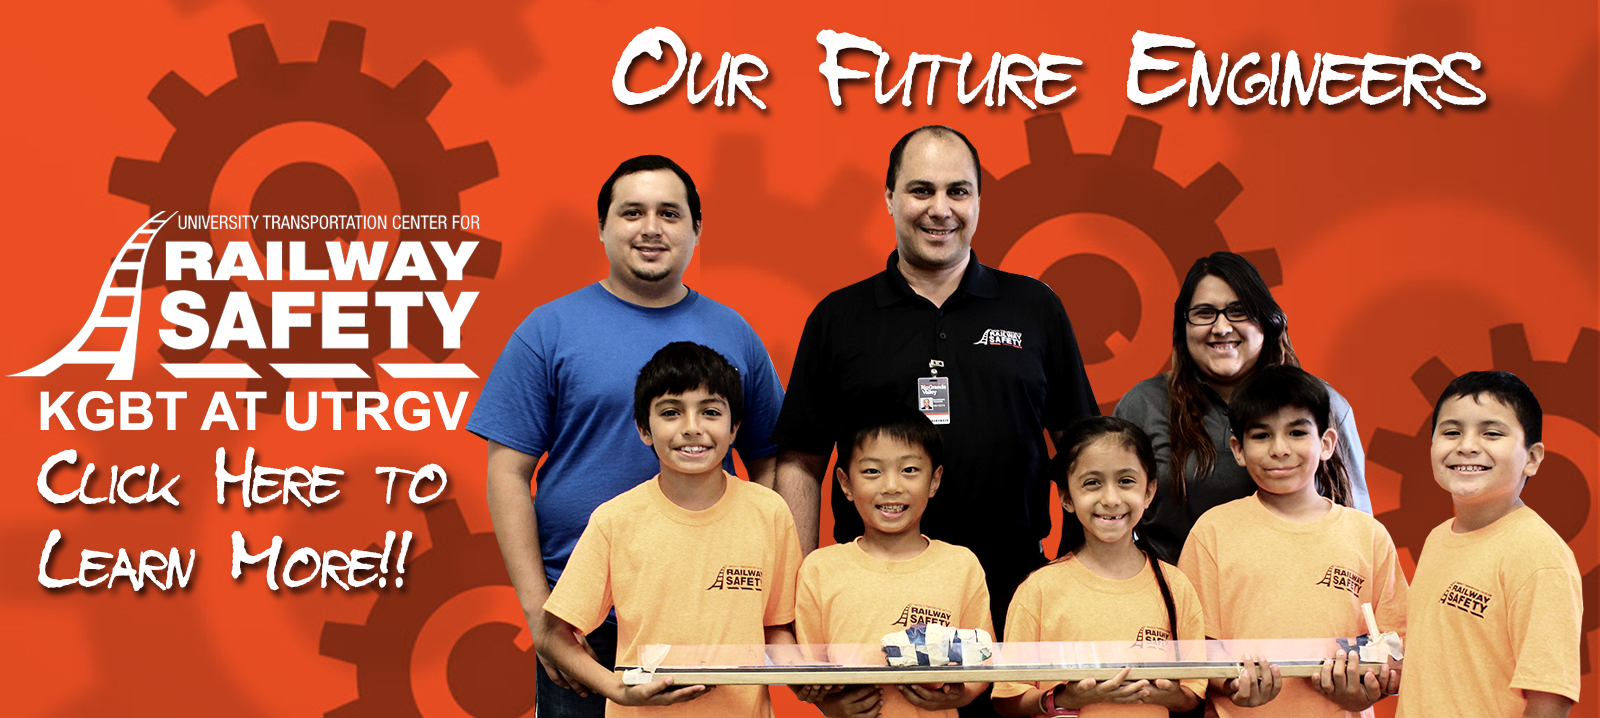 Our Future Engineers - KGBT at UTRGV - Click here to learn more!